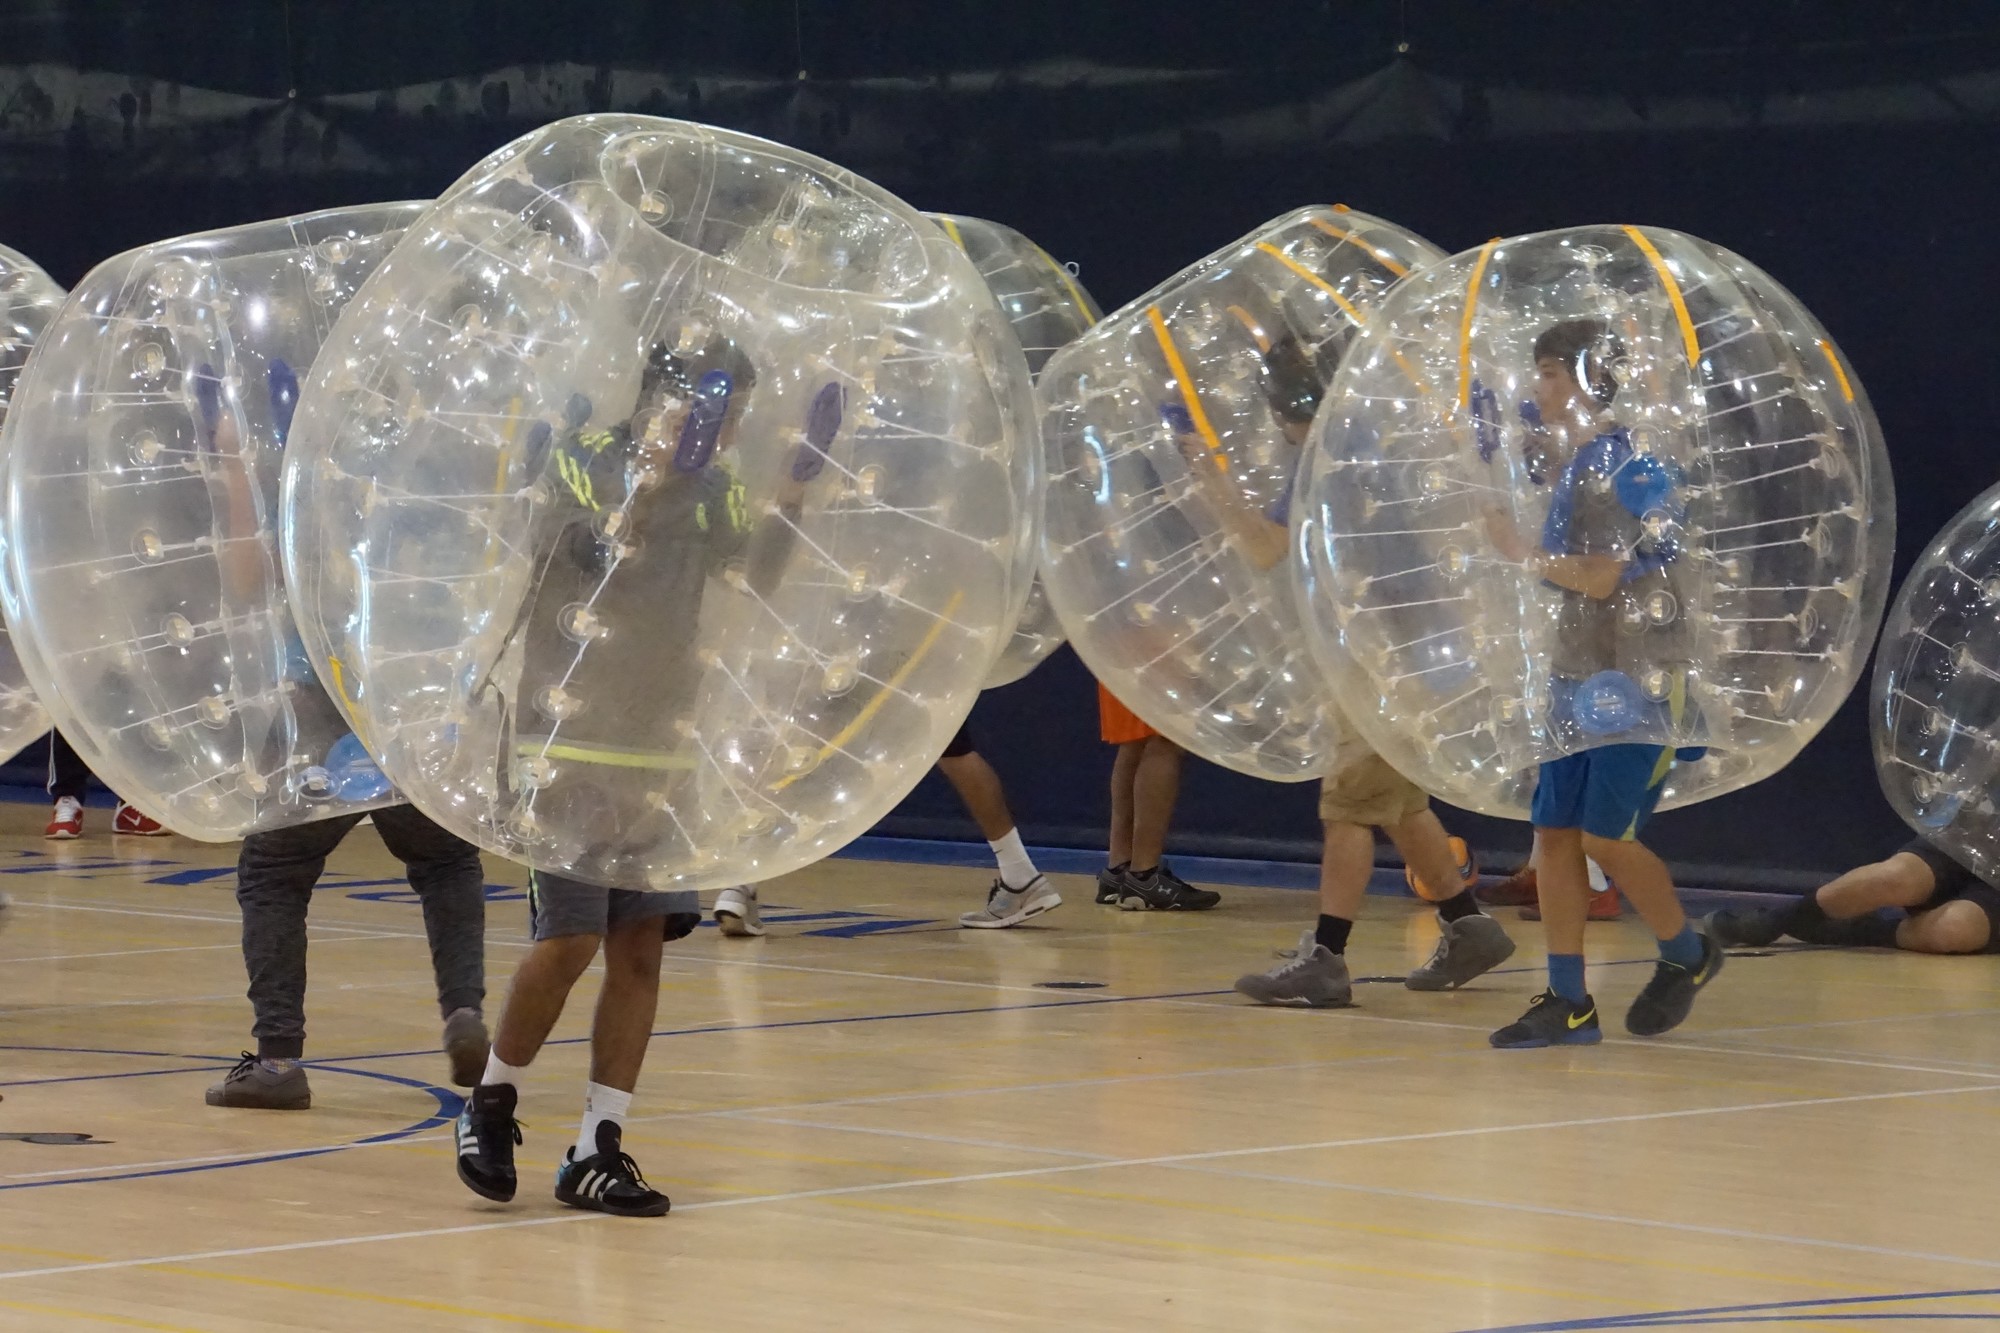 Activities like bubble soccer were a hit, organizers said.